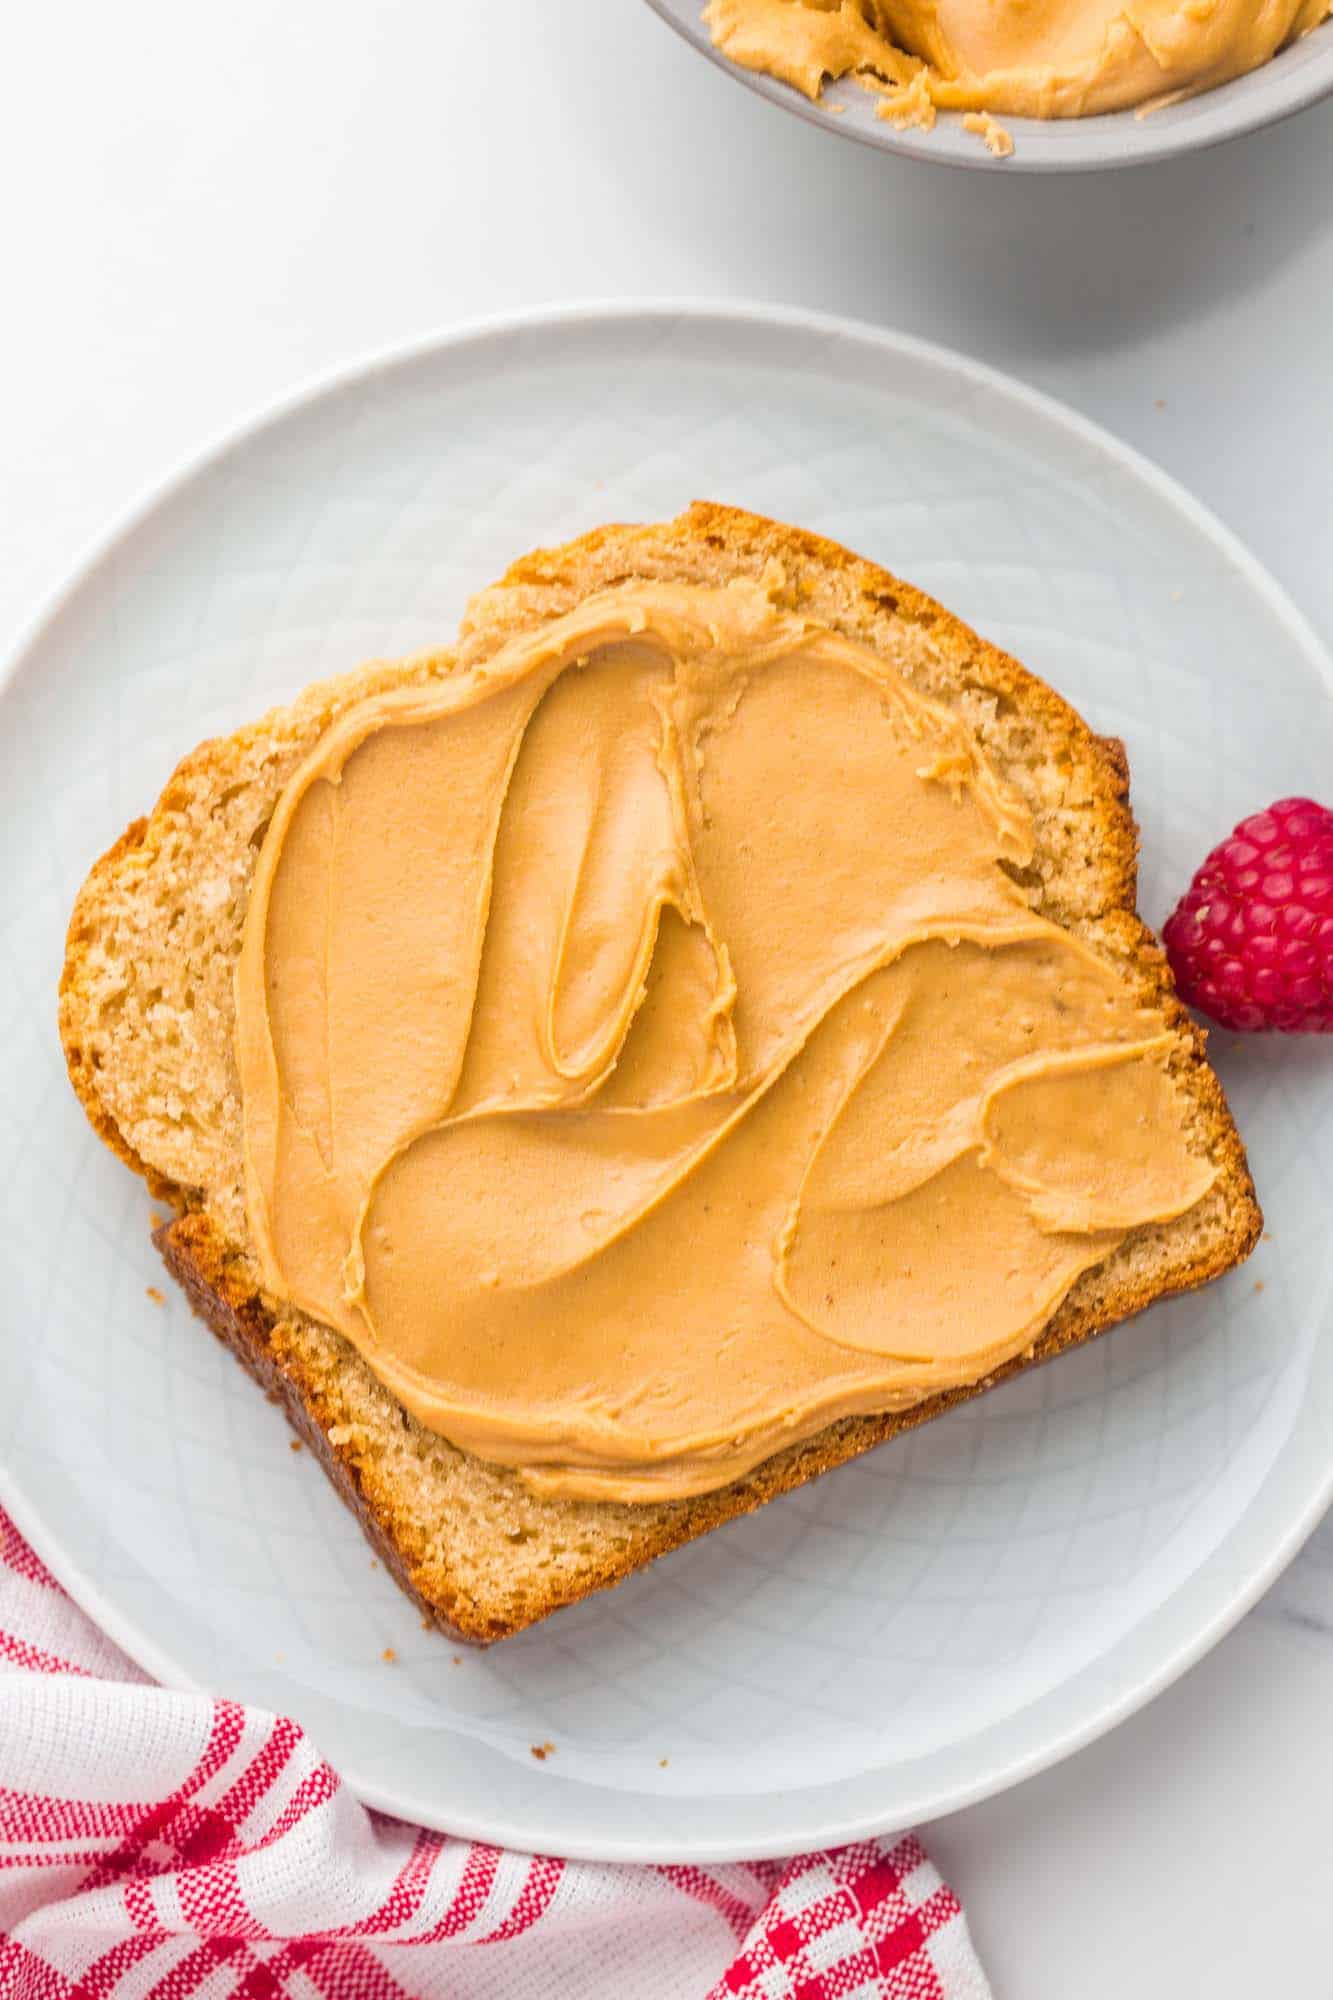 Overhead shot of a slice of peanut butter bread with smooth and creamy peanut butter spread on it, and a raspberry on the side.